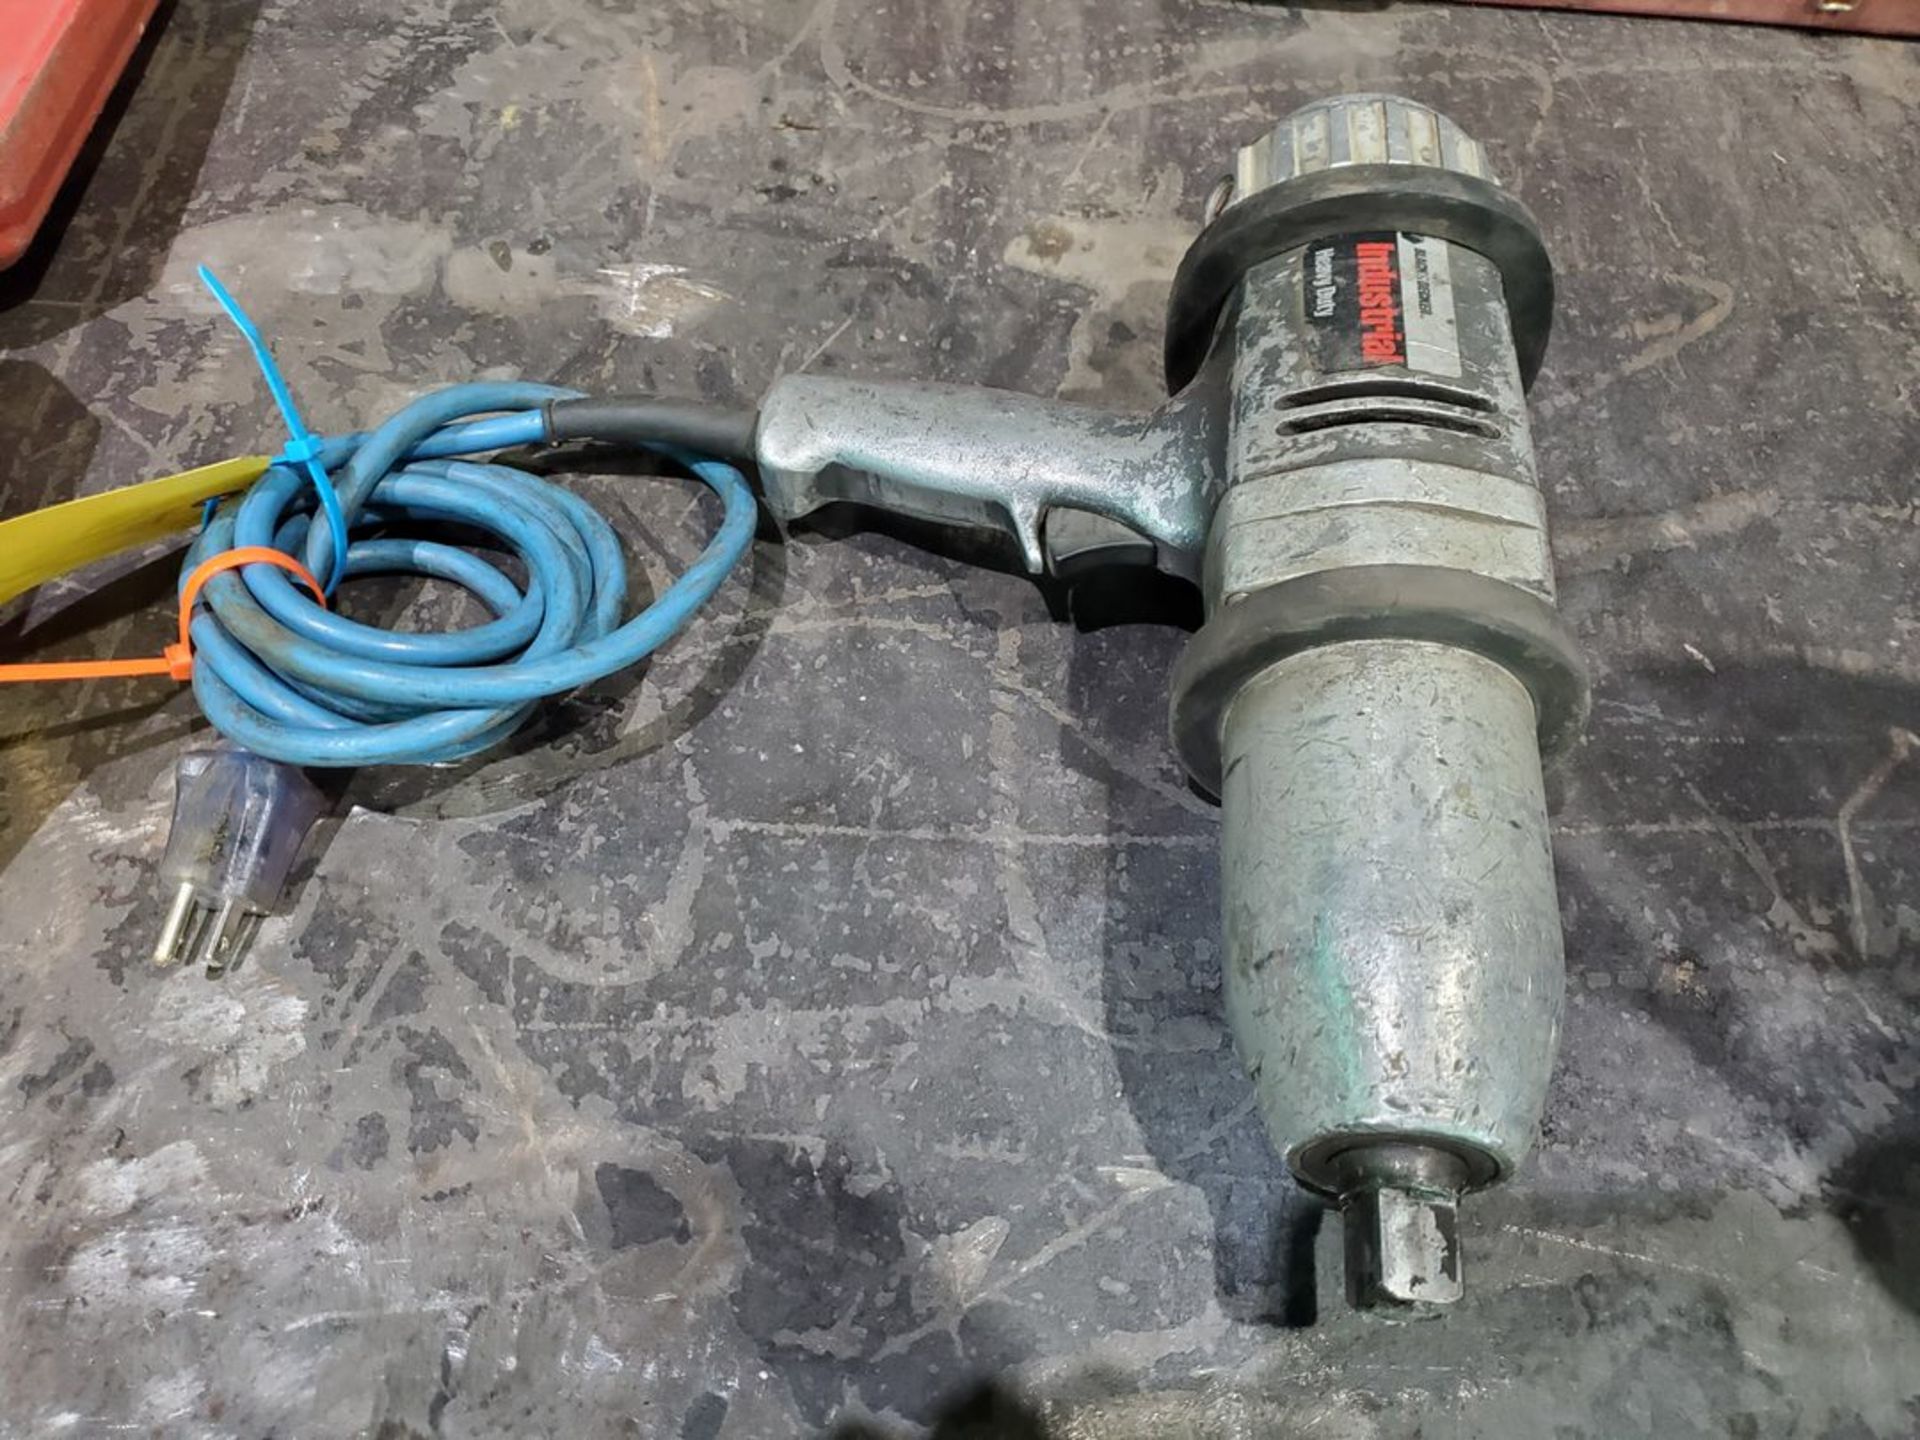 B&D 3/4" Impact Wrench 120V, 7.5A - Image 4 of 5